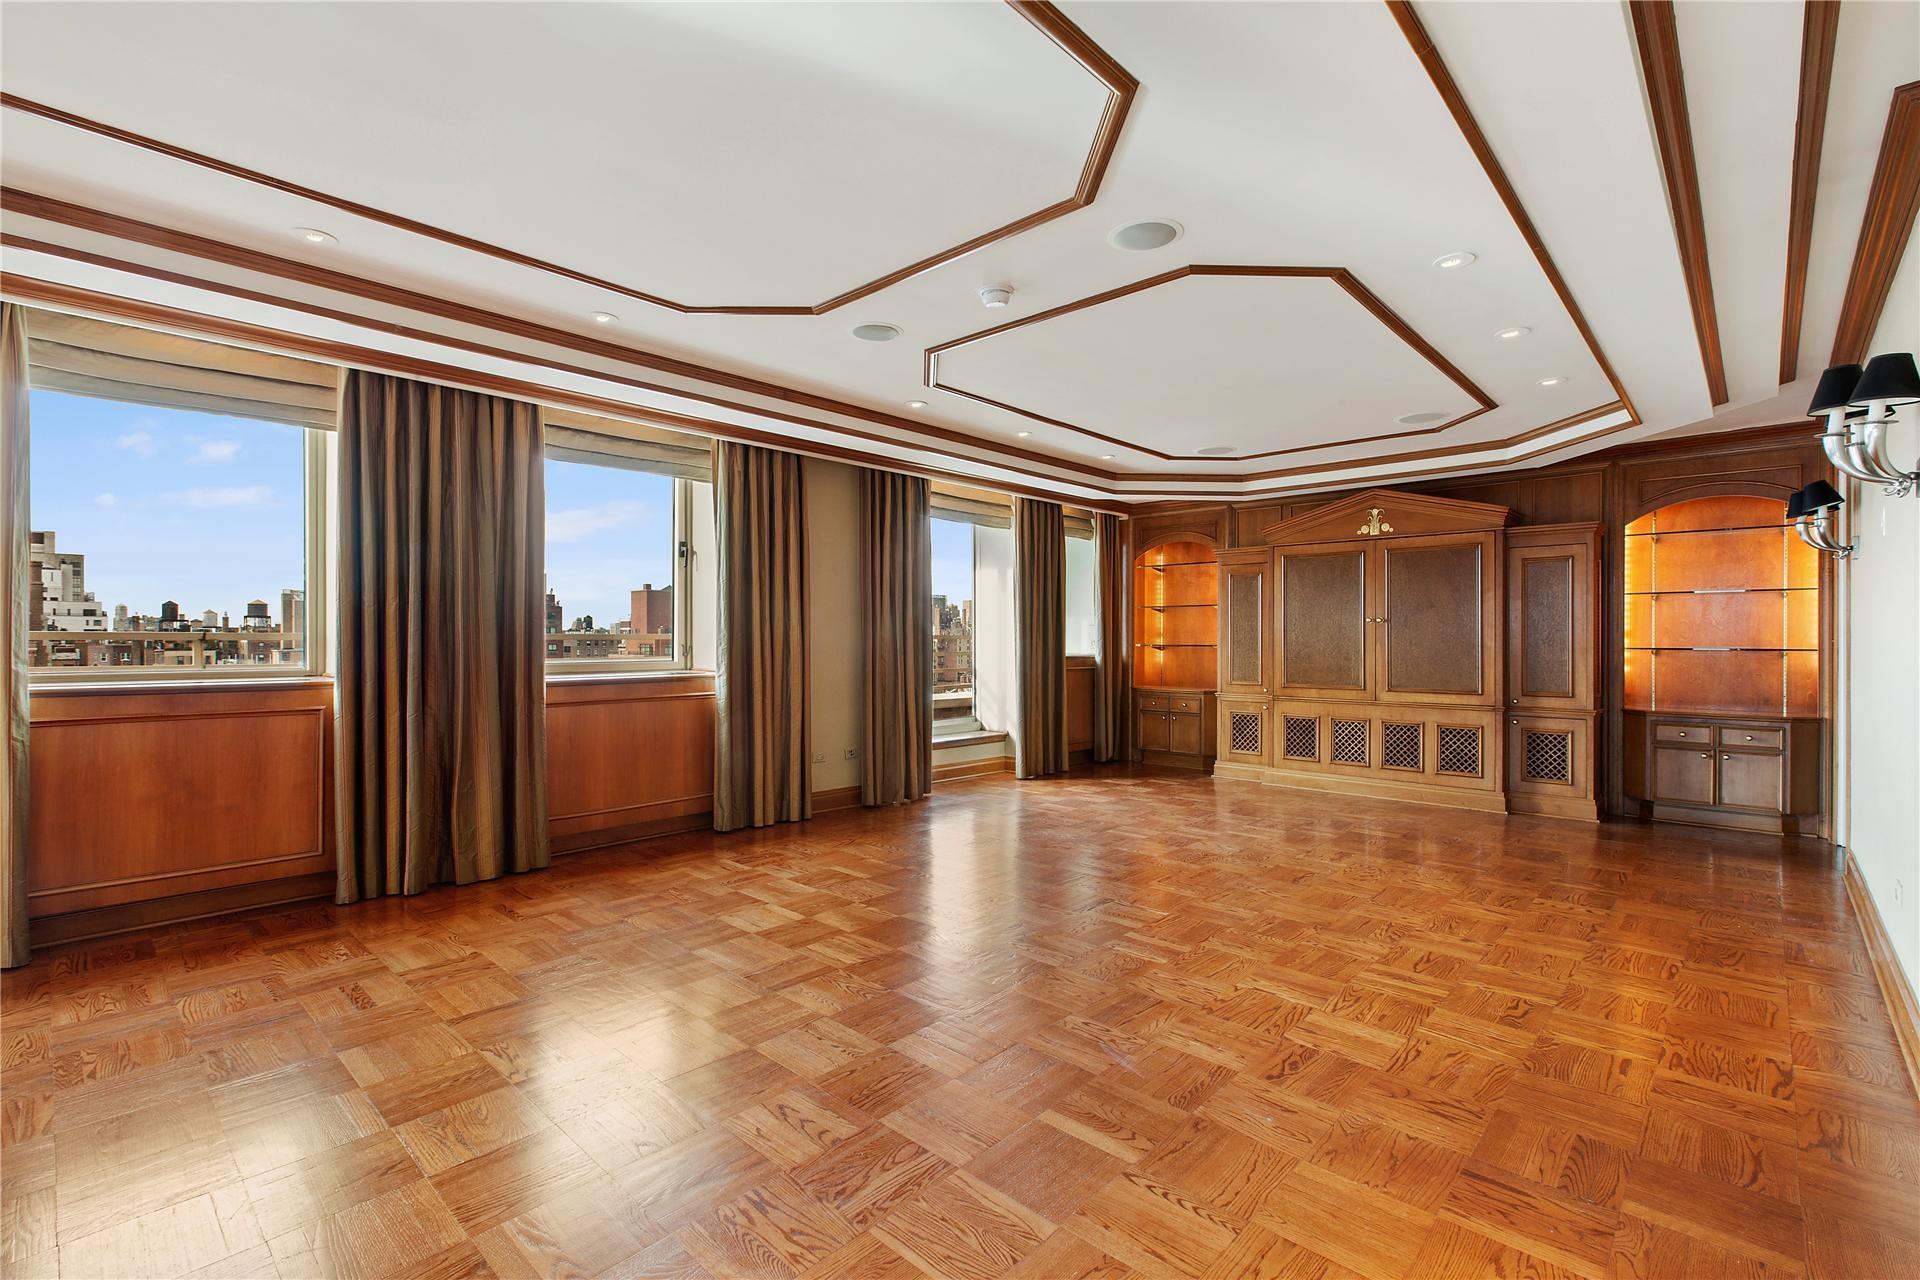 201 East 80th Street 18, Yorkville, Upper East Side, NYC - 5 Bedrooms  
5 Bathrooms  
8 Rooms - 